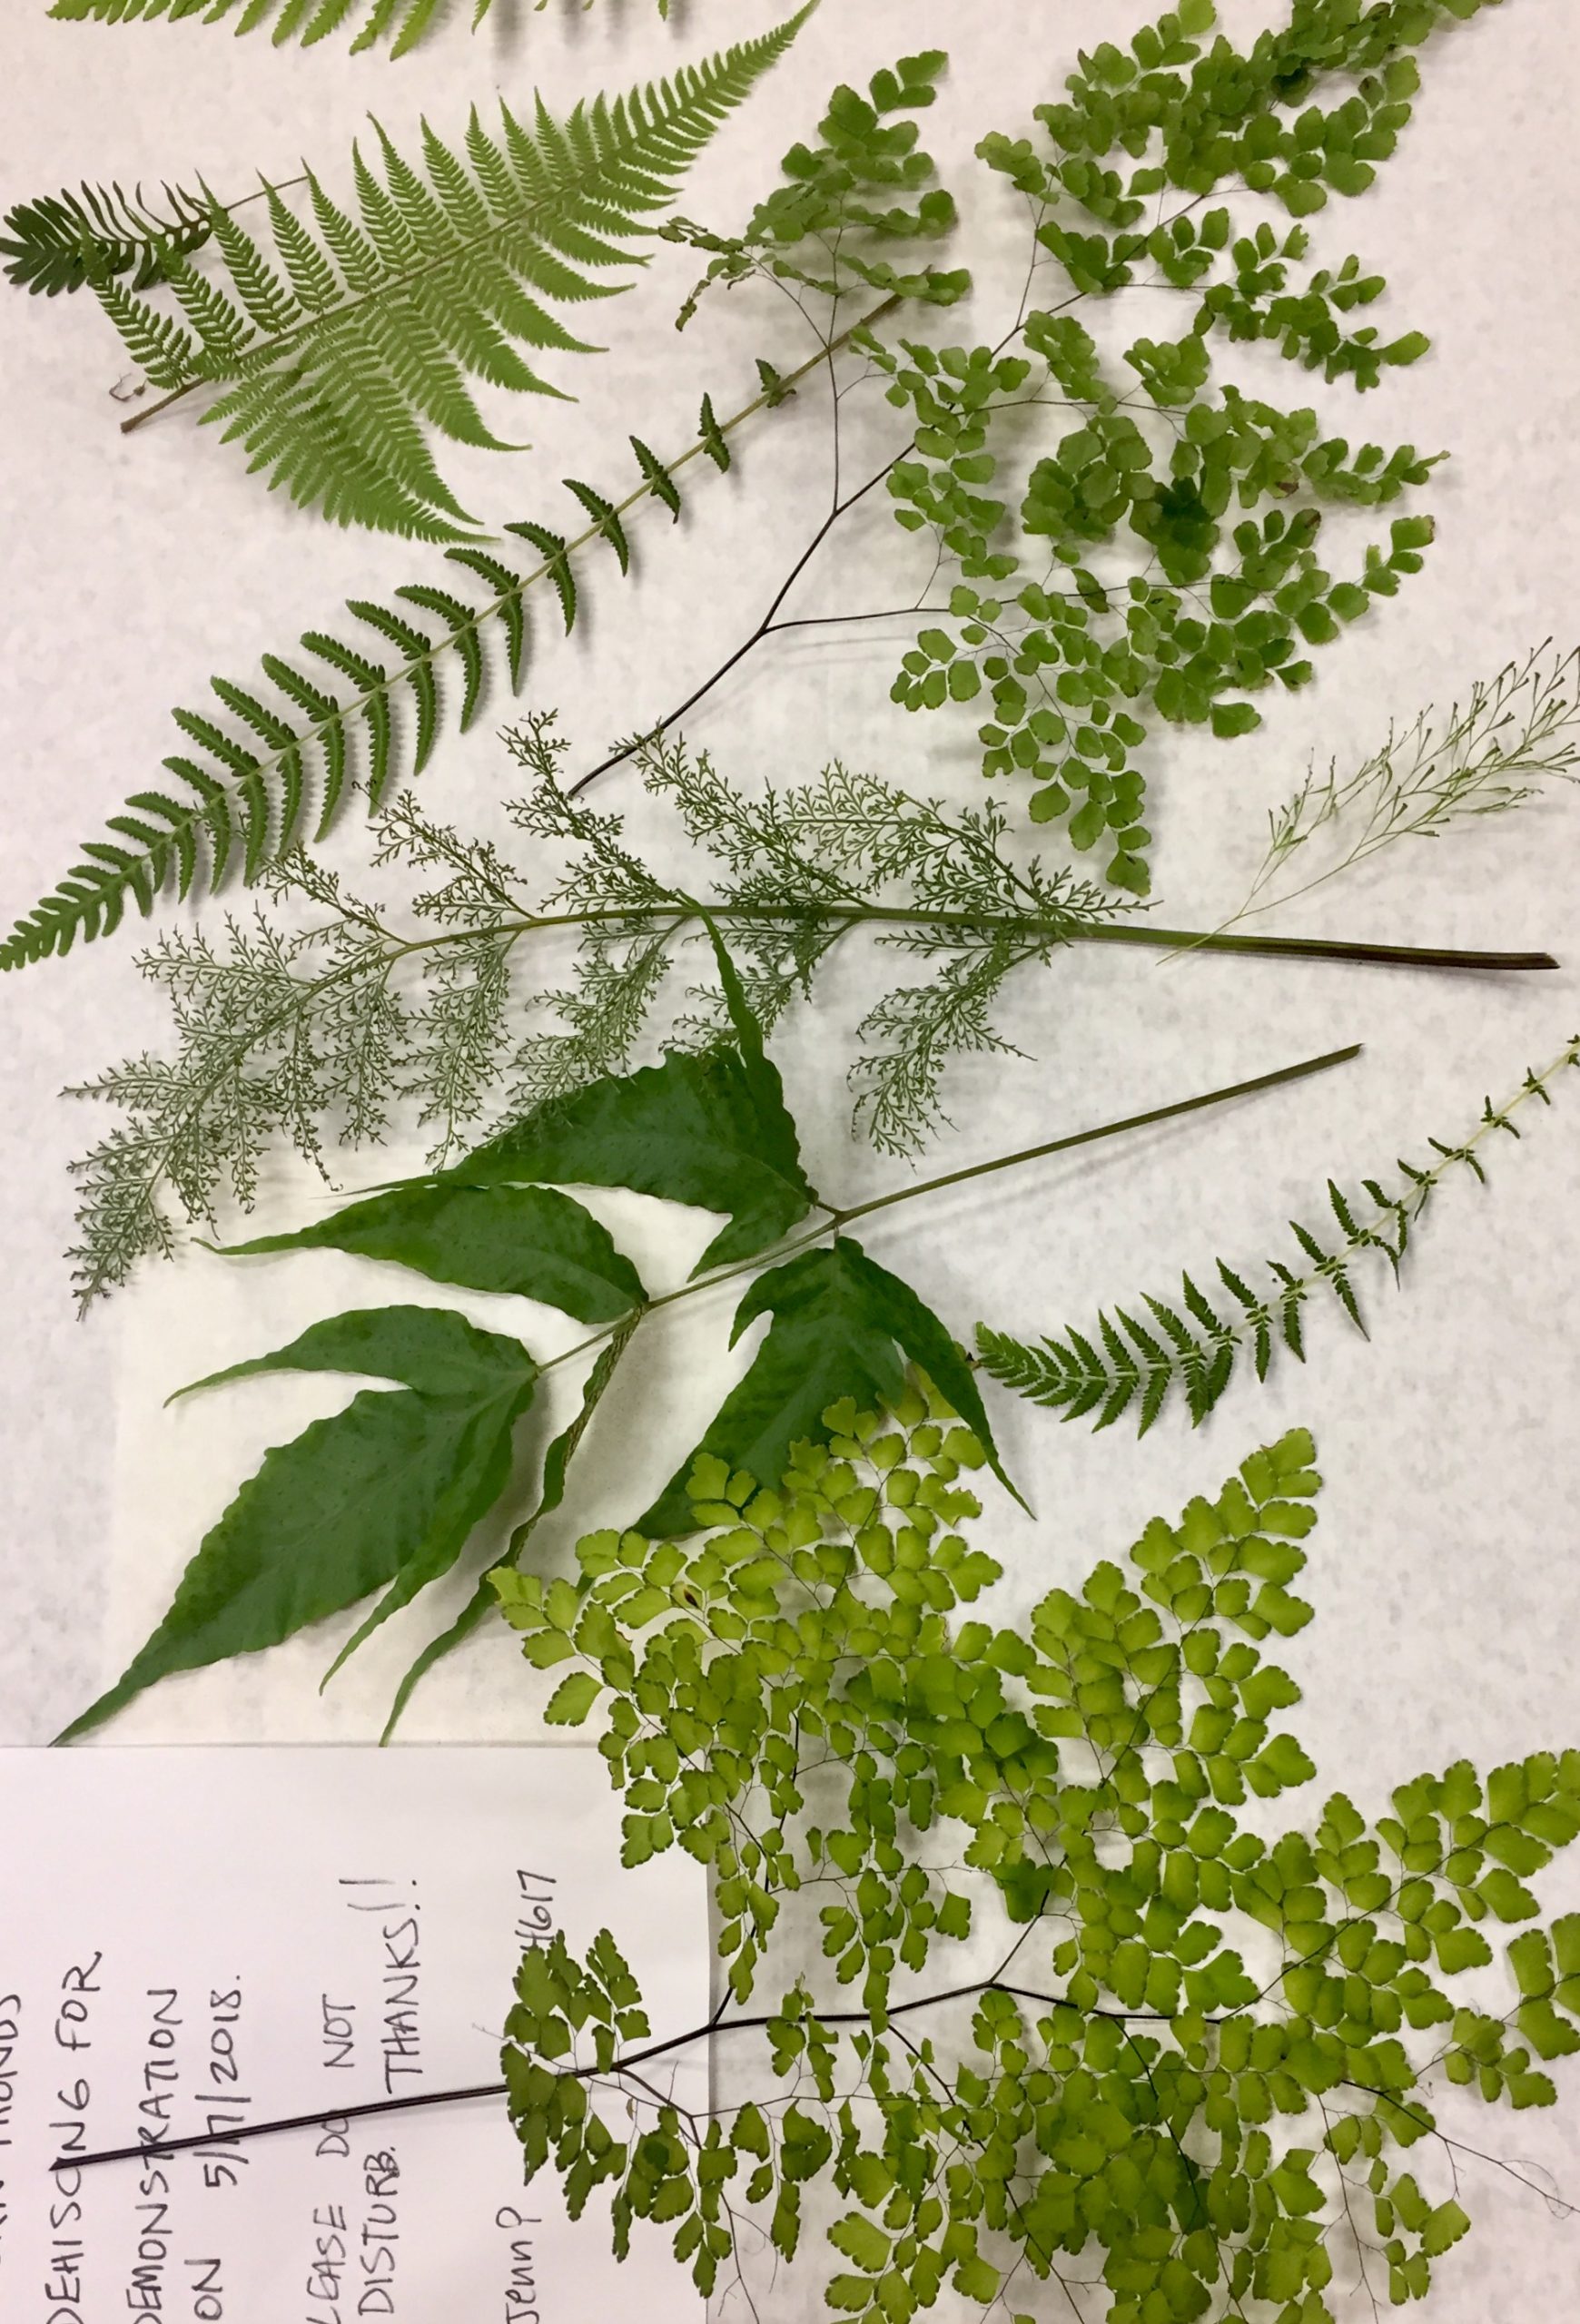 Some of the beautiful and varied ferns of southern Florida on display.